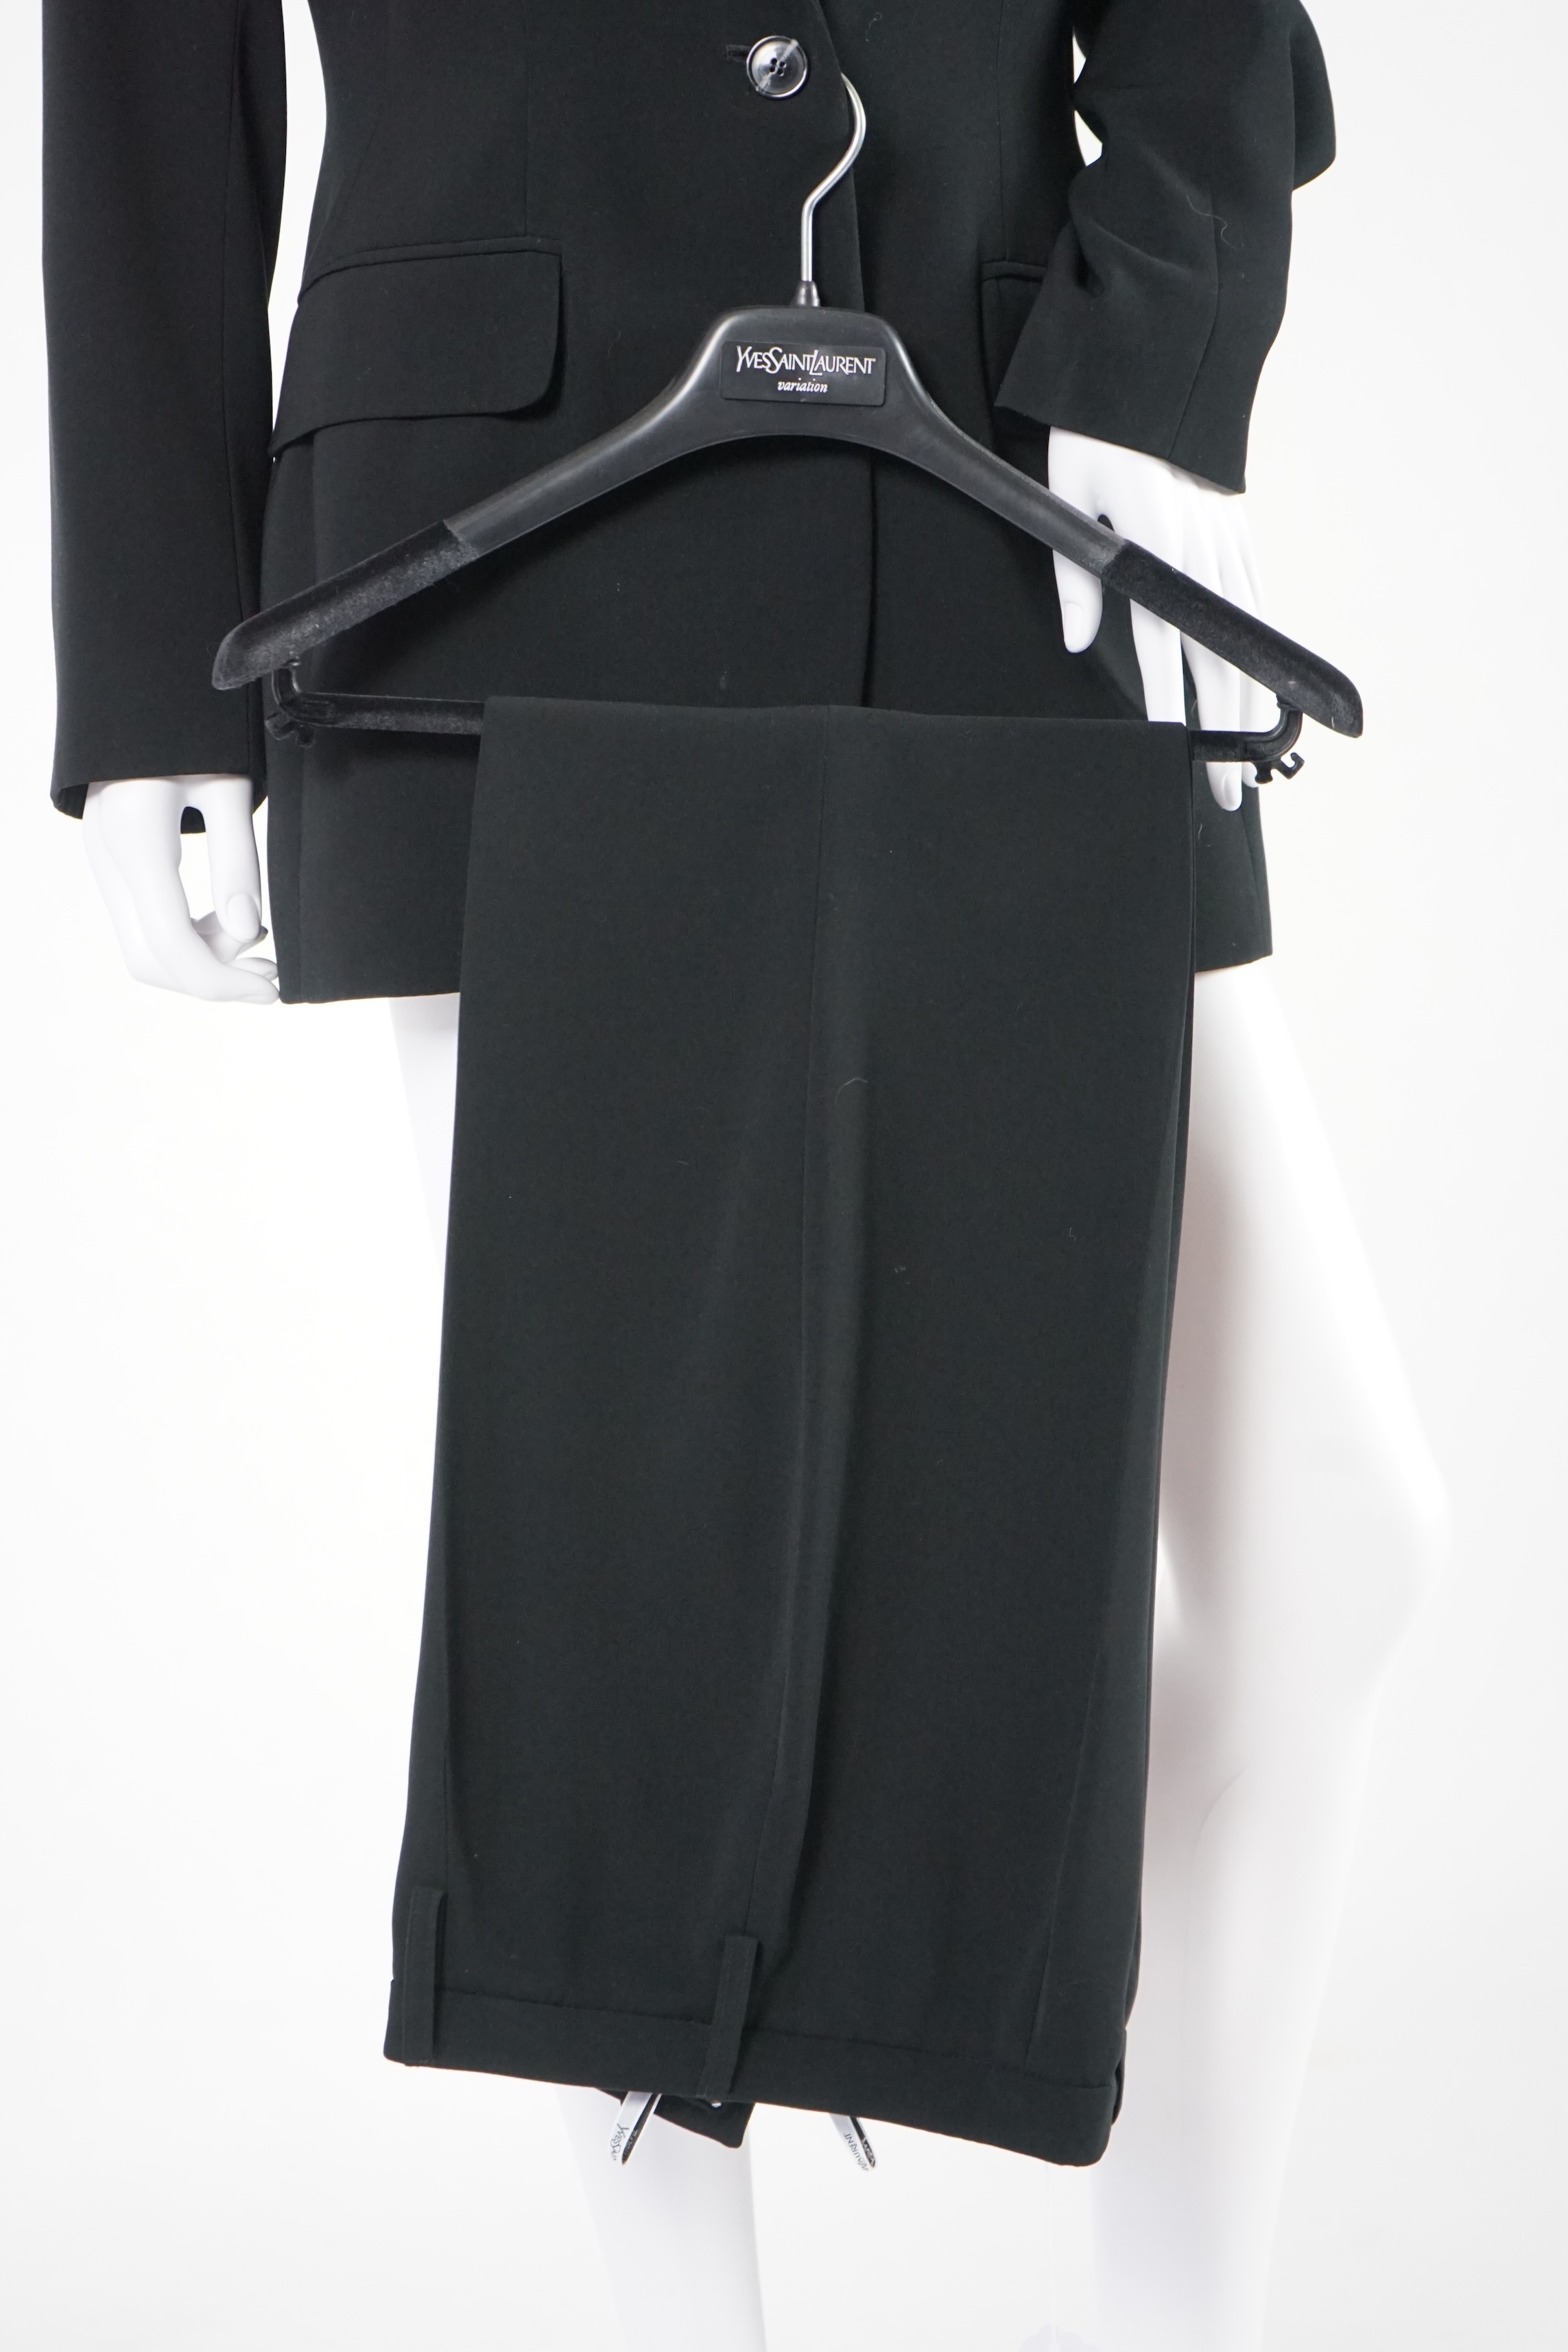 Two vintage Yves Saint Laurent variation lady's trouser suits, F 42 (UK 14). Please note alterations to make the waist smaller may have been carried out on some of the skirts. Proceeds to Happy Paws Puppy Rescue.